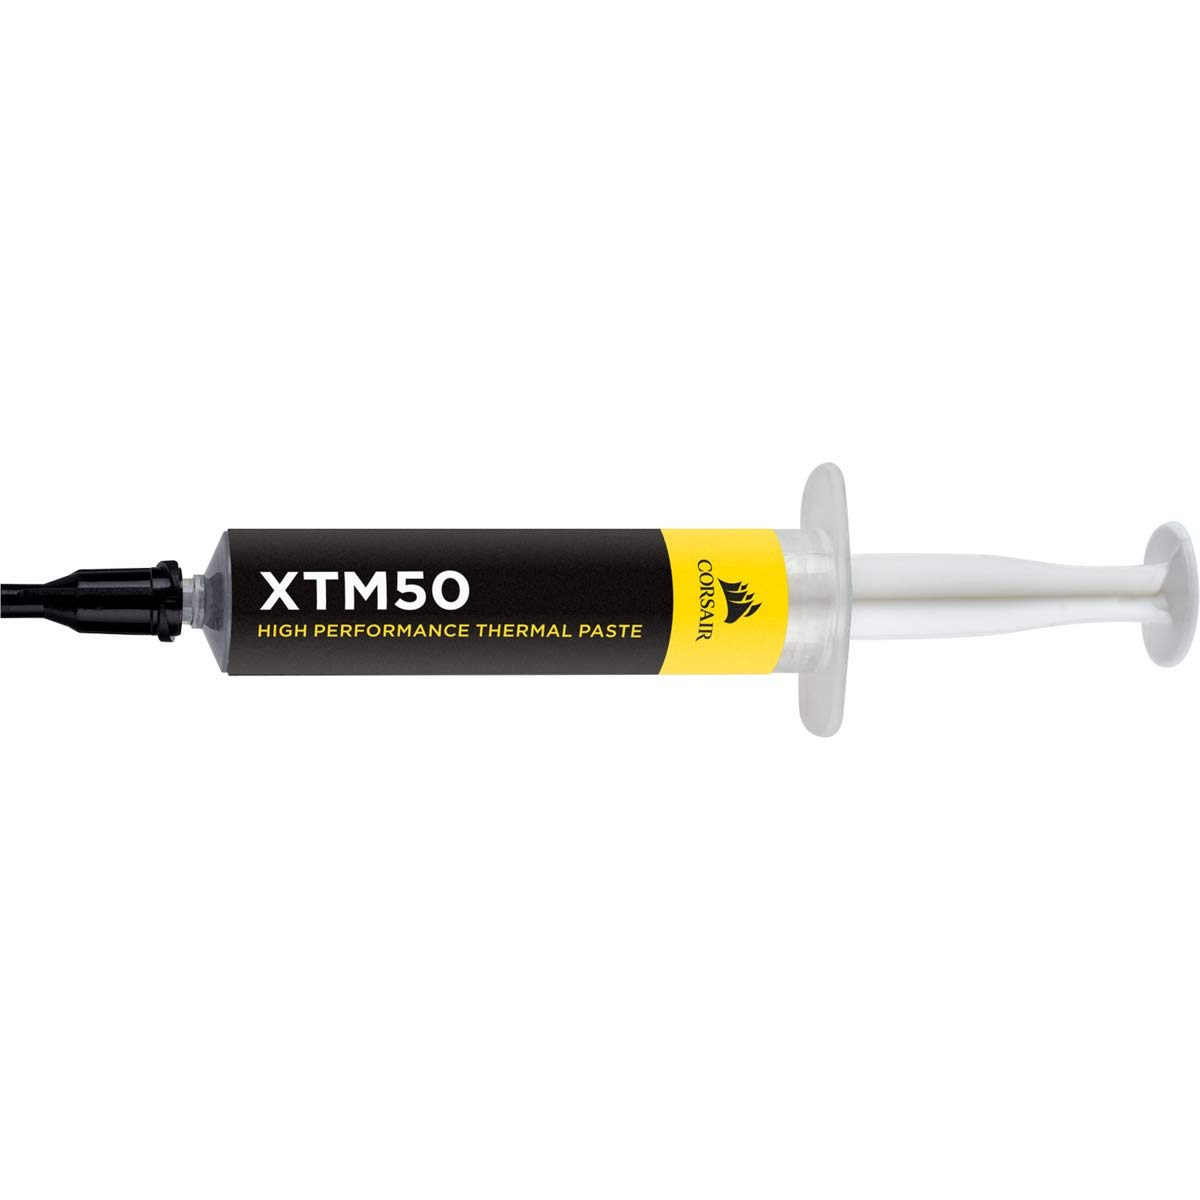 Corsair XTM70 Extreme Performance Thermal Paste, 3G for Intel & AMD Processors u